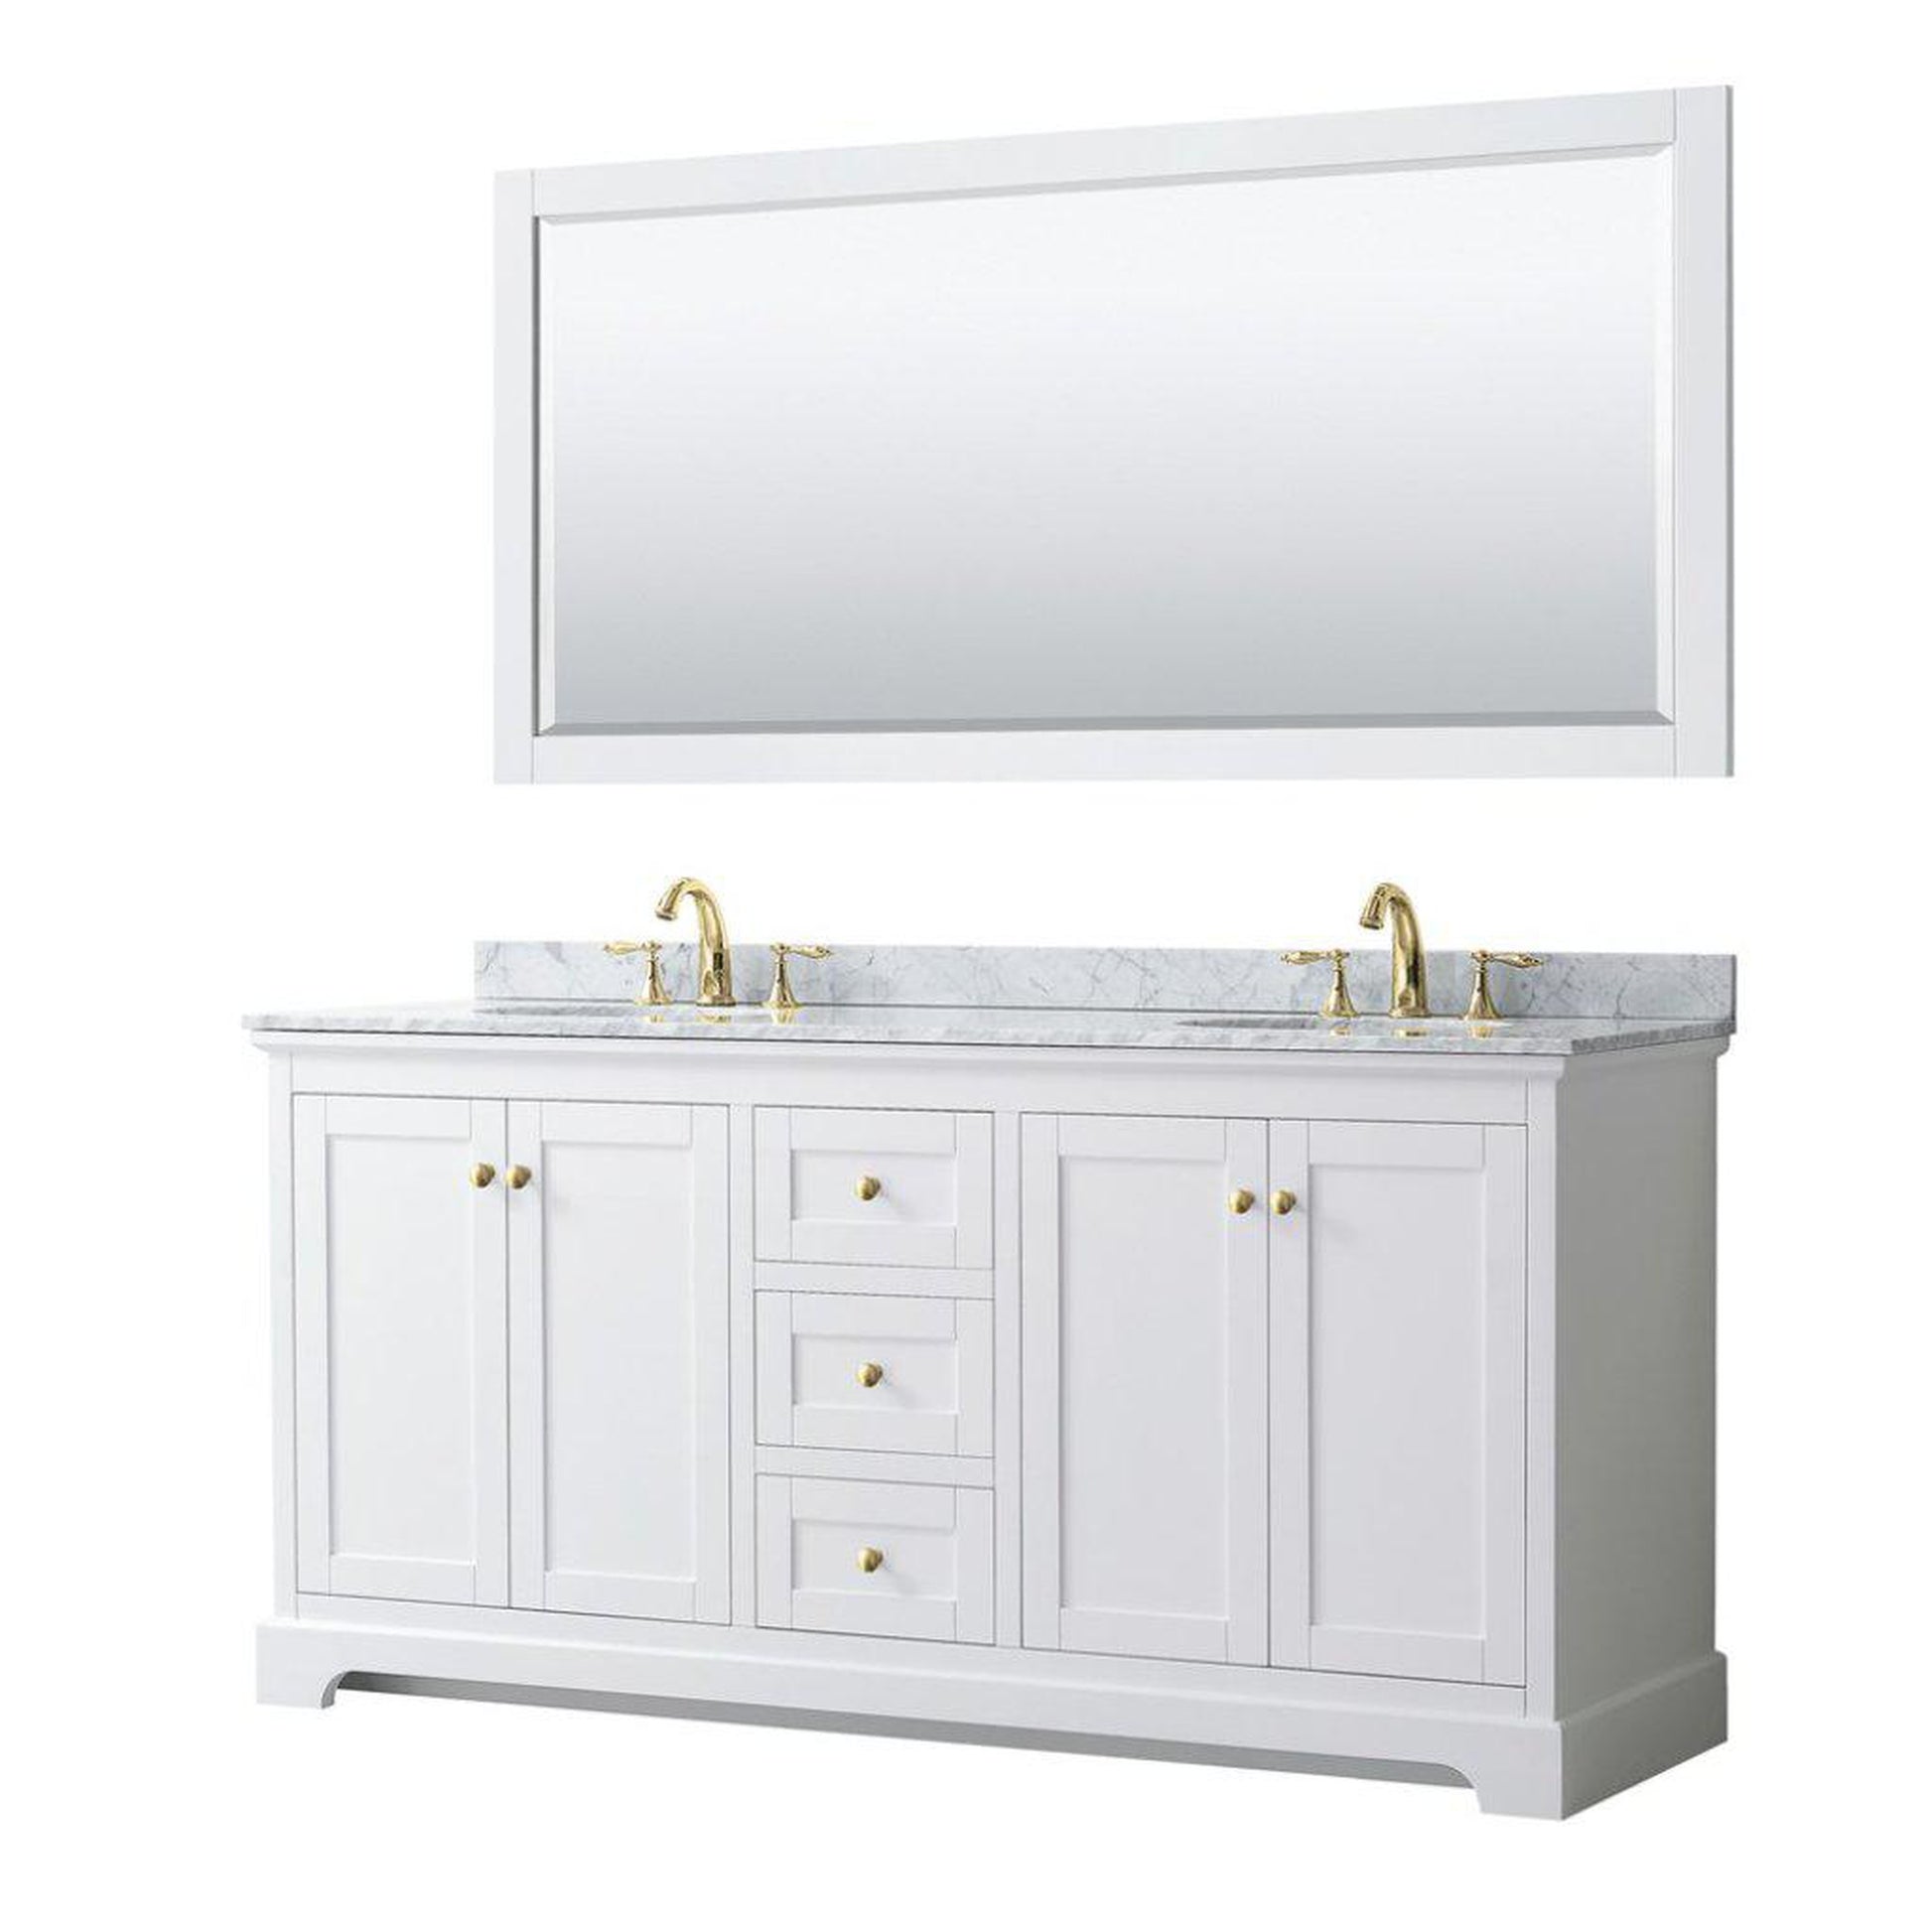 Wyndham Collection Avery 72" White Double Bathroom Vanity Set, White Carrara Marble Countertop With 3-Hole Faucet, 8" Oval Sink, 70" Mirror, Gold Trims